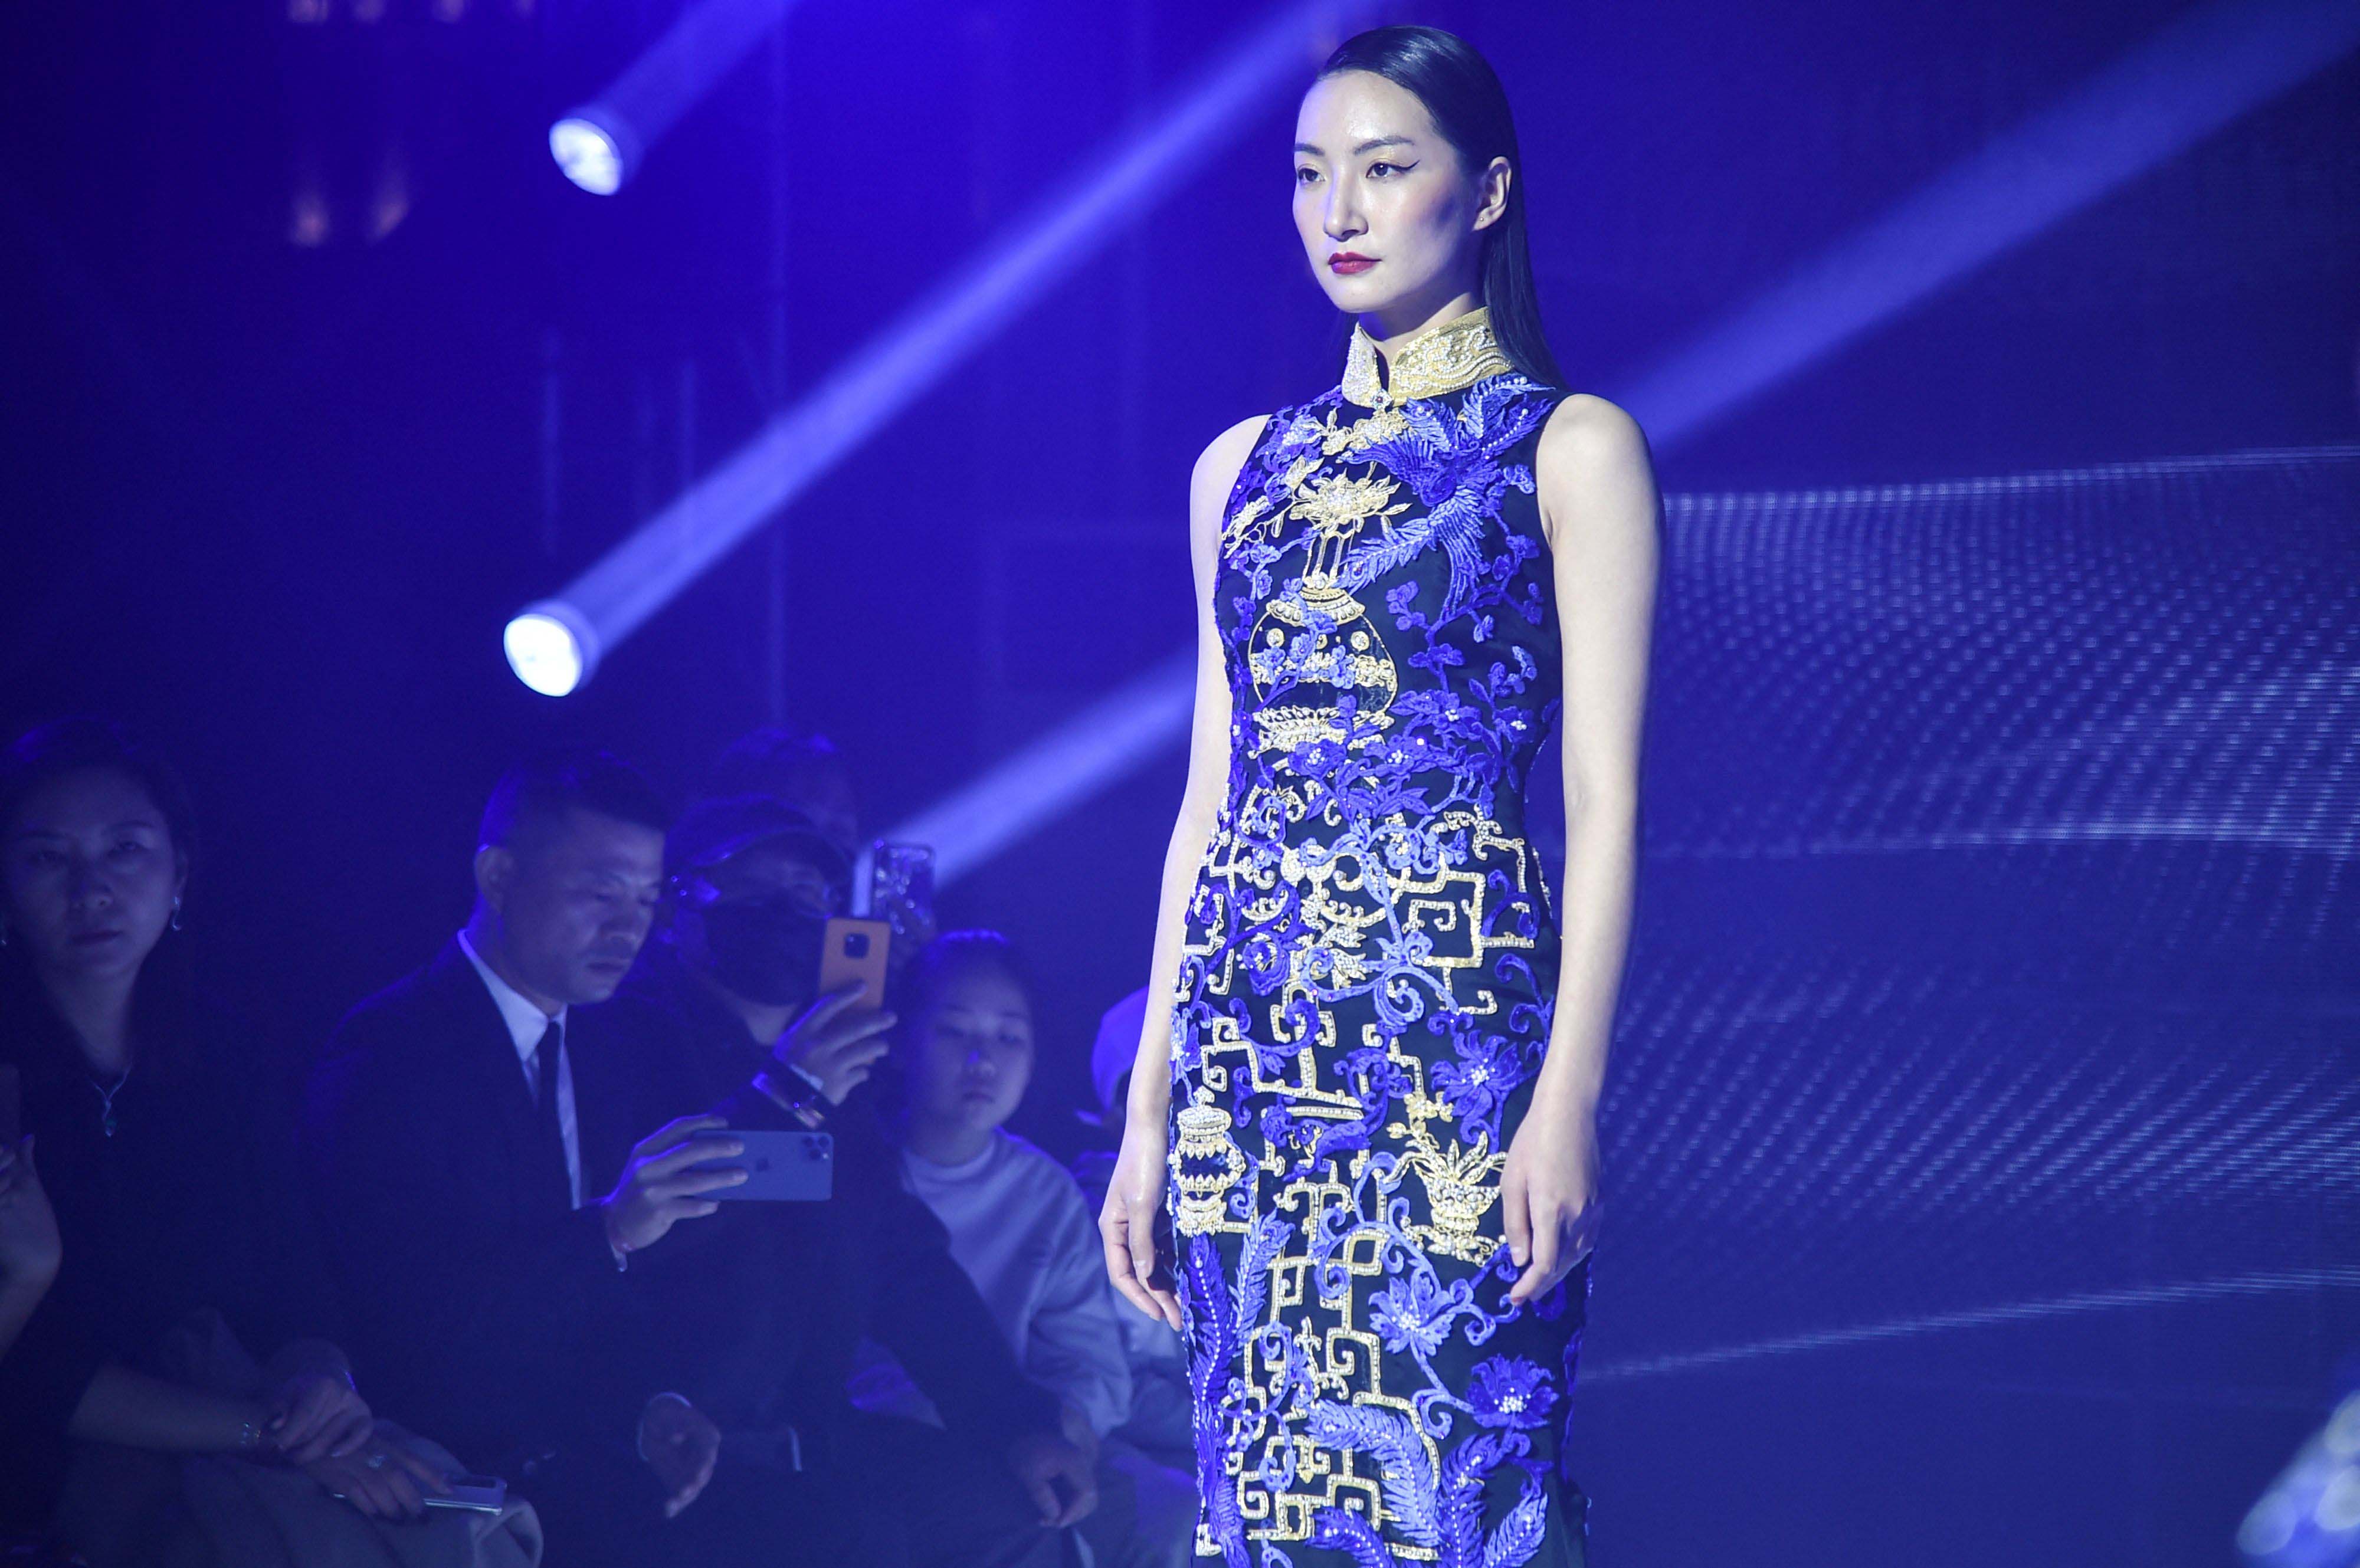 A model wearing traditional Chinese dress Qipao rehearsing for a Shanghai fashion show.<br>